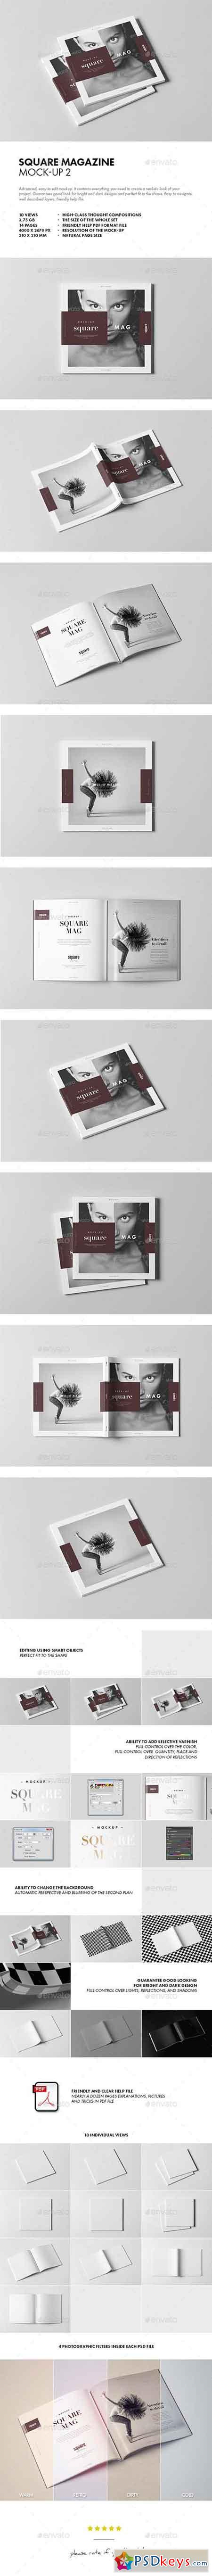 Download Magazines Free Download Photoshop Vector Stock Image Via Torrent Zippyshare From Psdkeys Com Page 11 Chan 61240072 Rssing Com PSD Mockup Templates